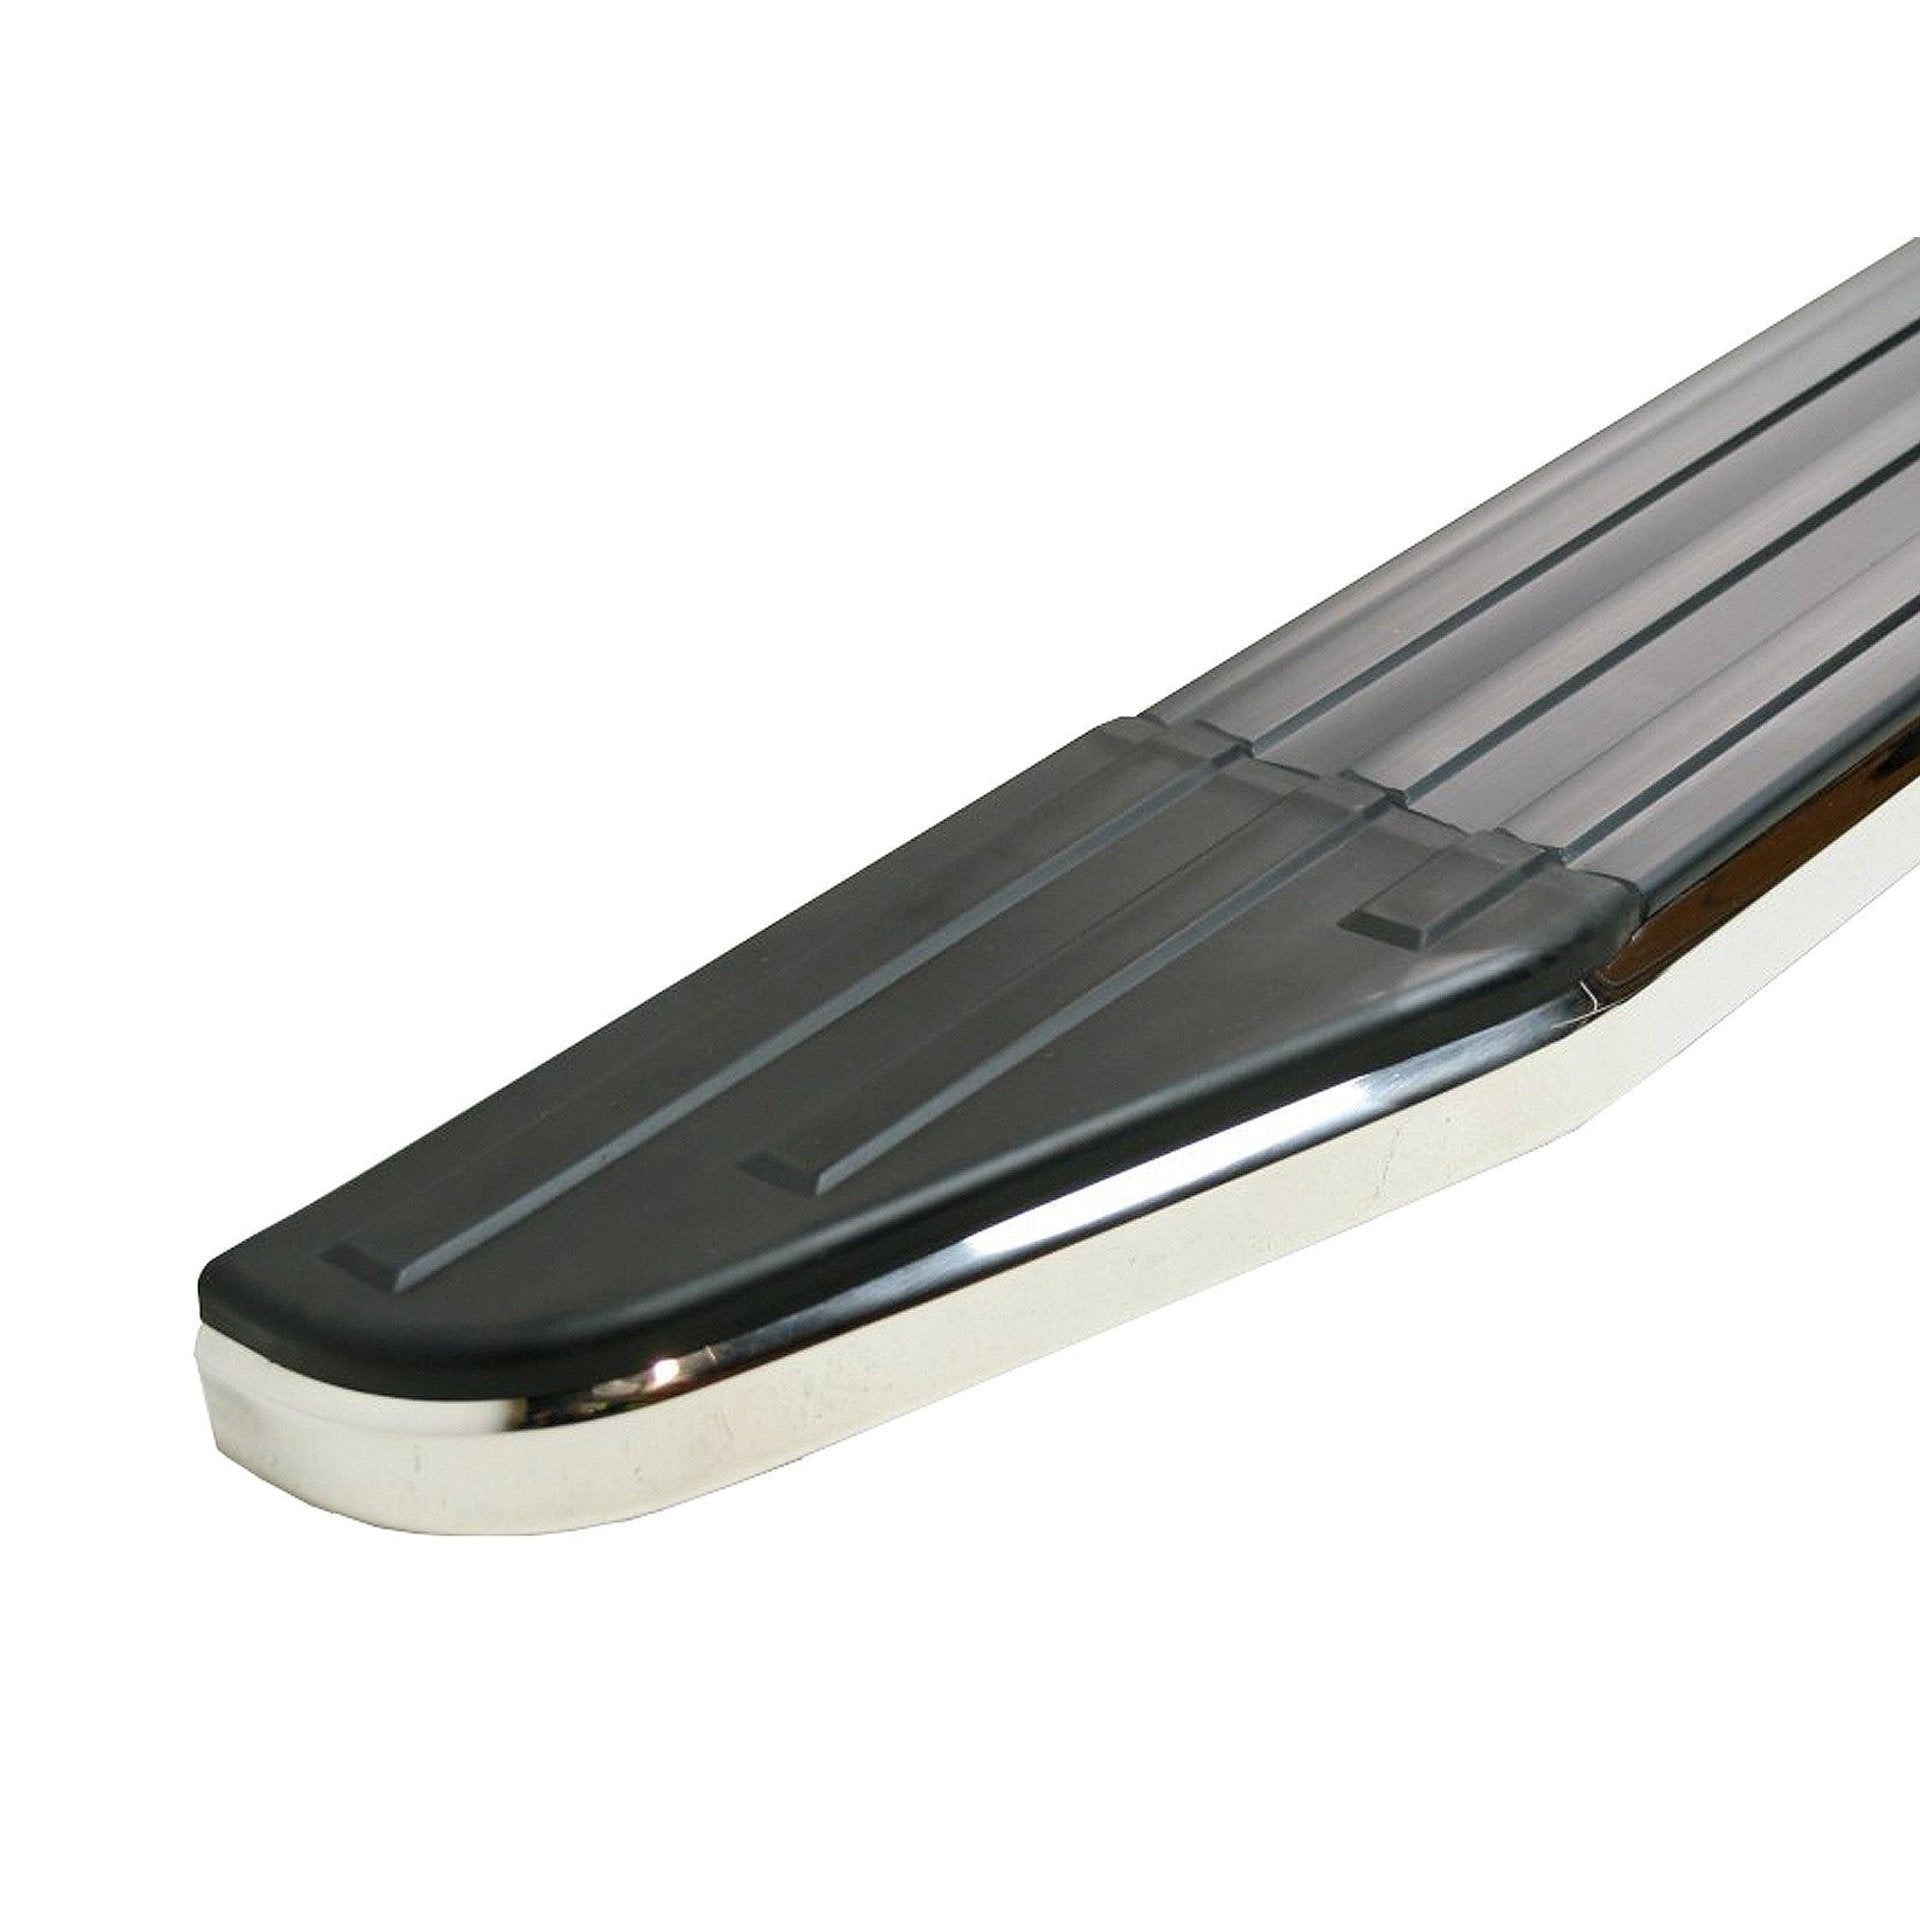 Raptor Side Steps Running Boards for the Ford Kuga 2013-2019 -  - sold by Direct4x4